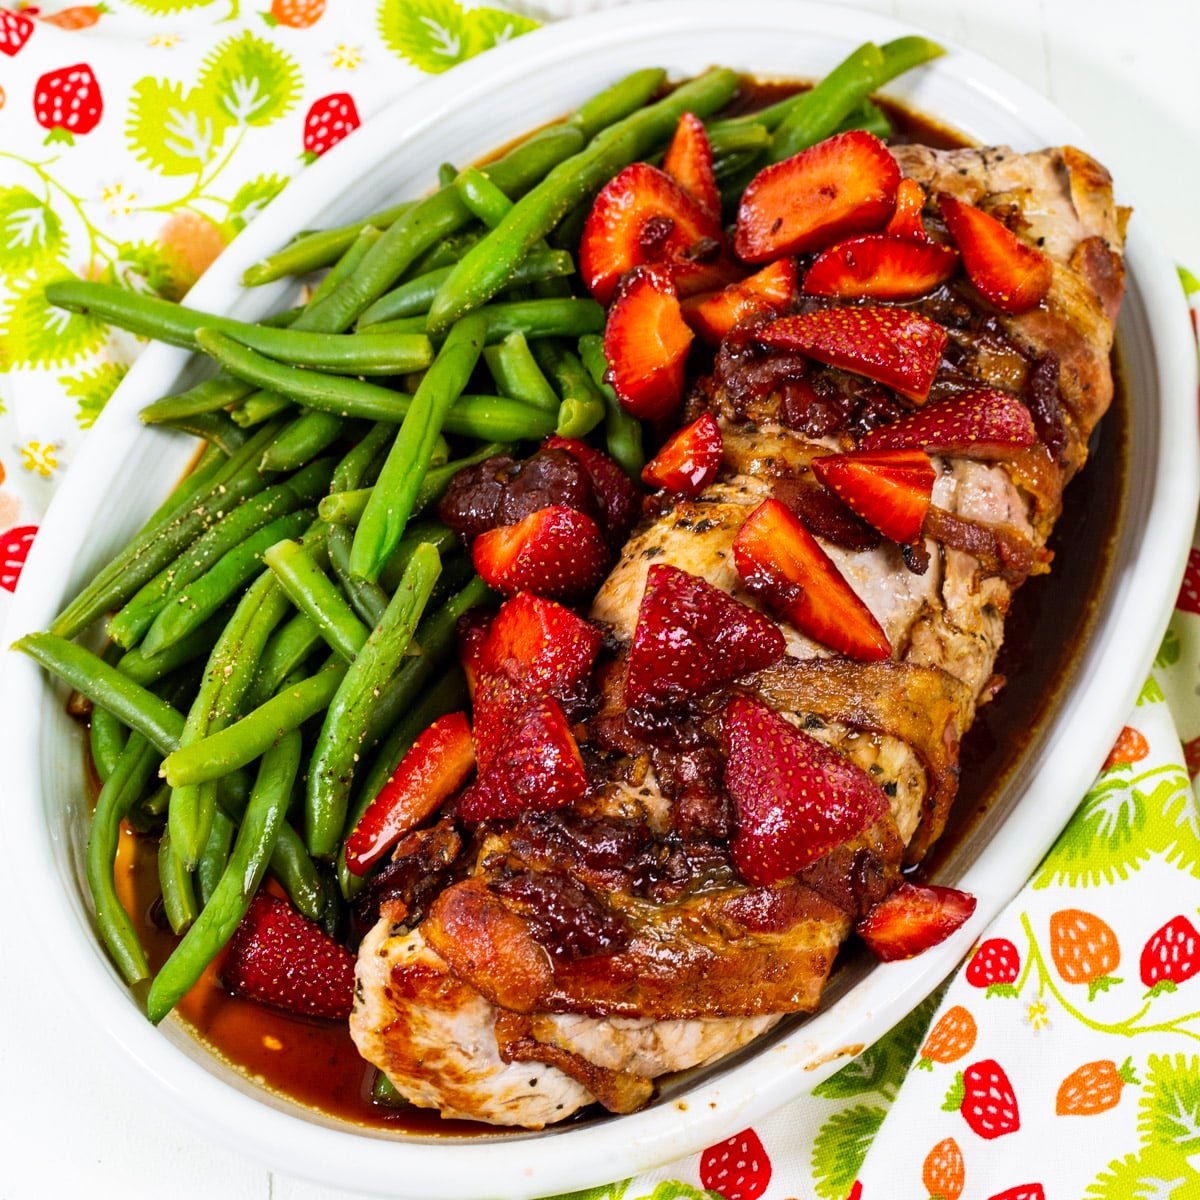 Pork Tenderloin with Balsamic Starwberries on a serving plate with green beans.